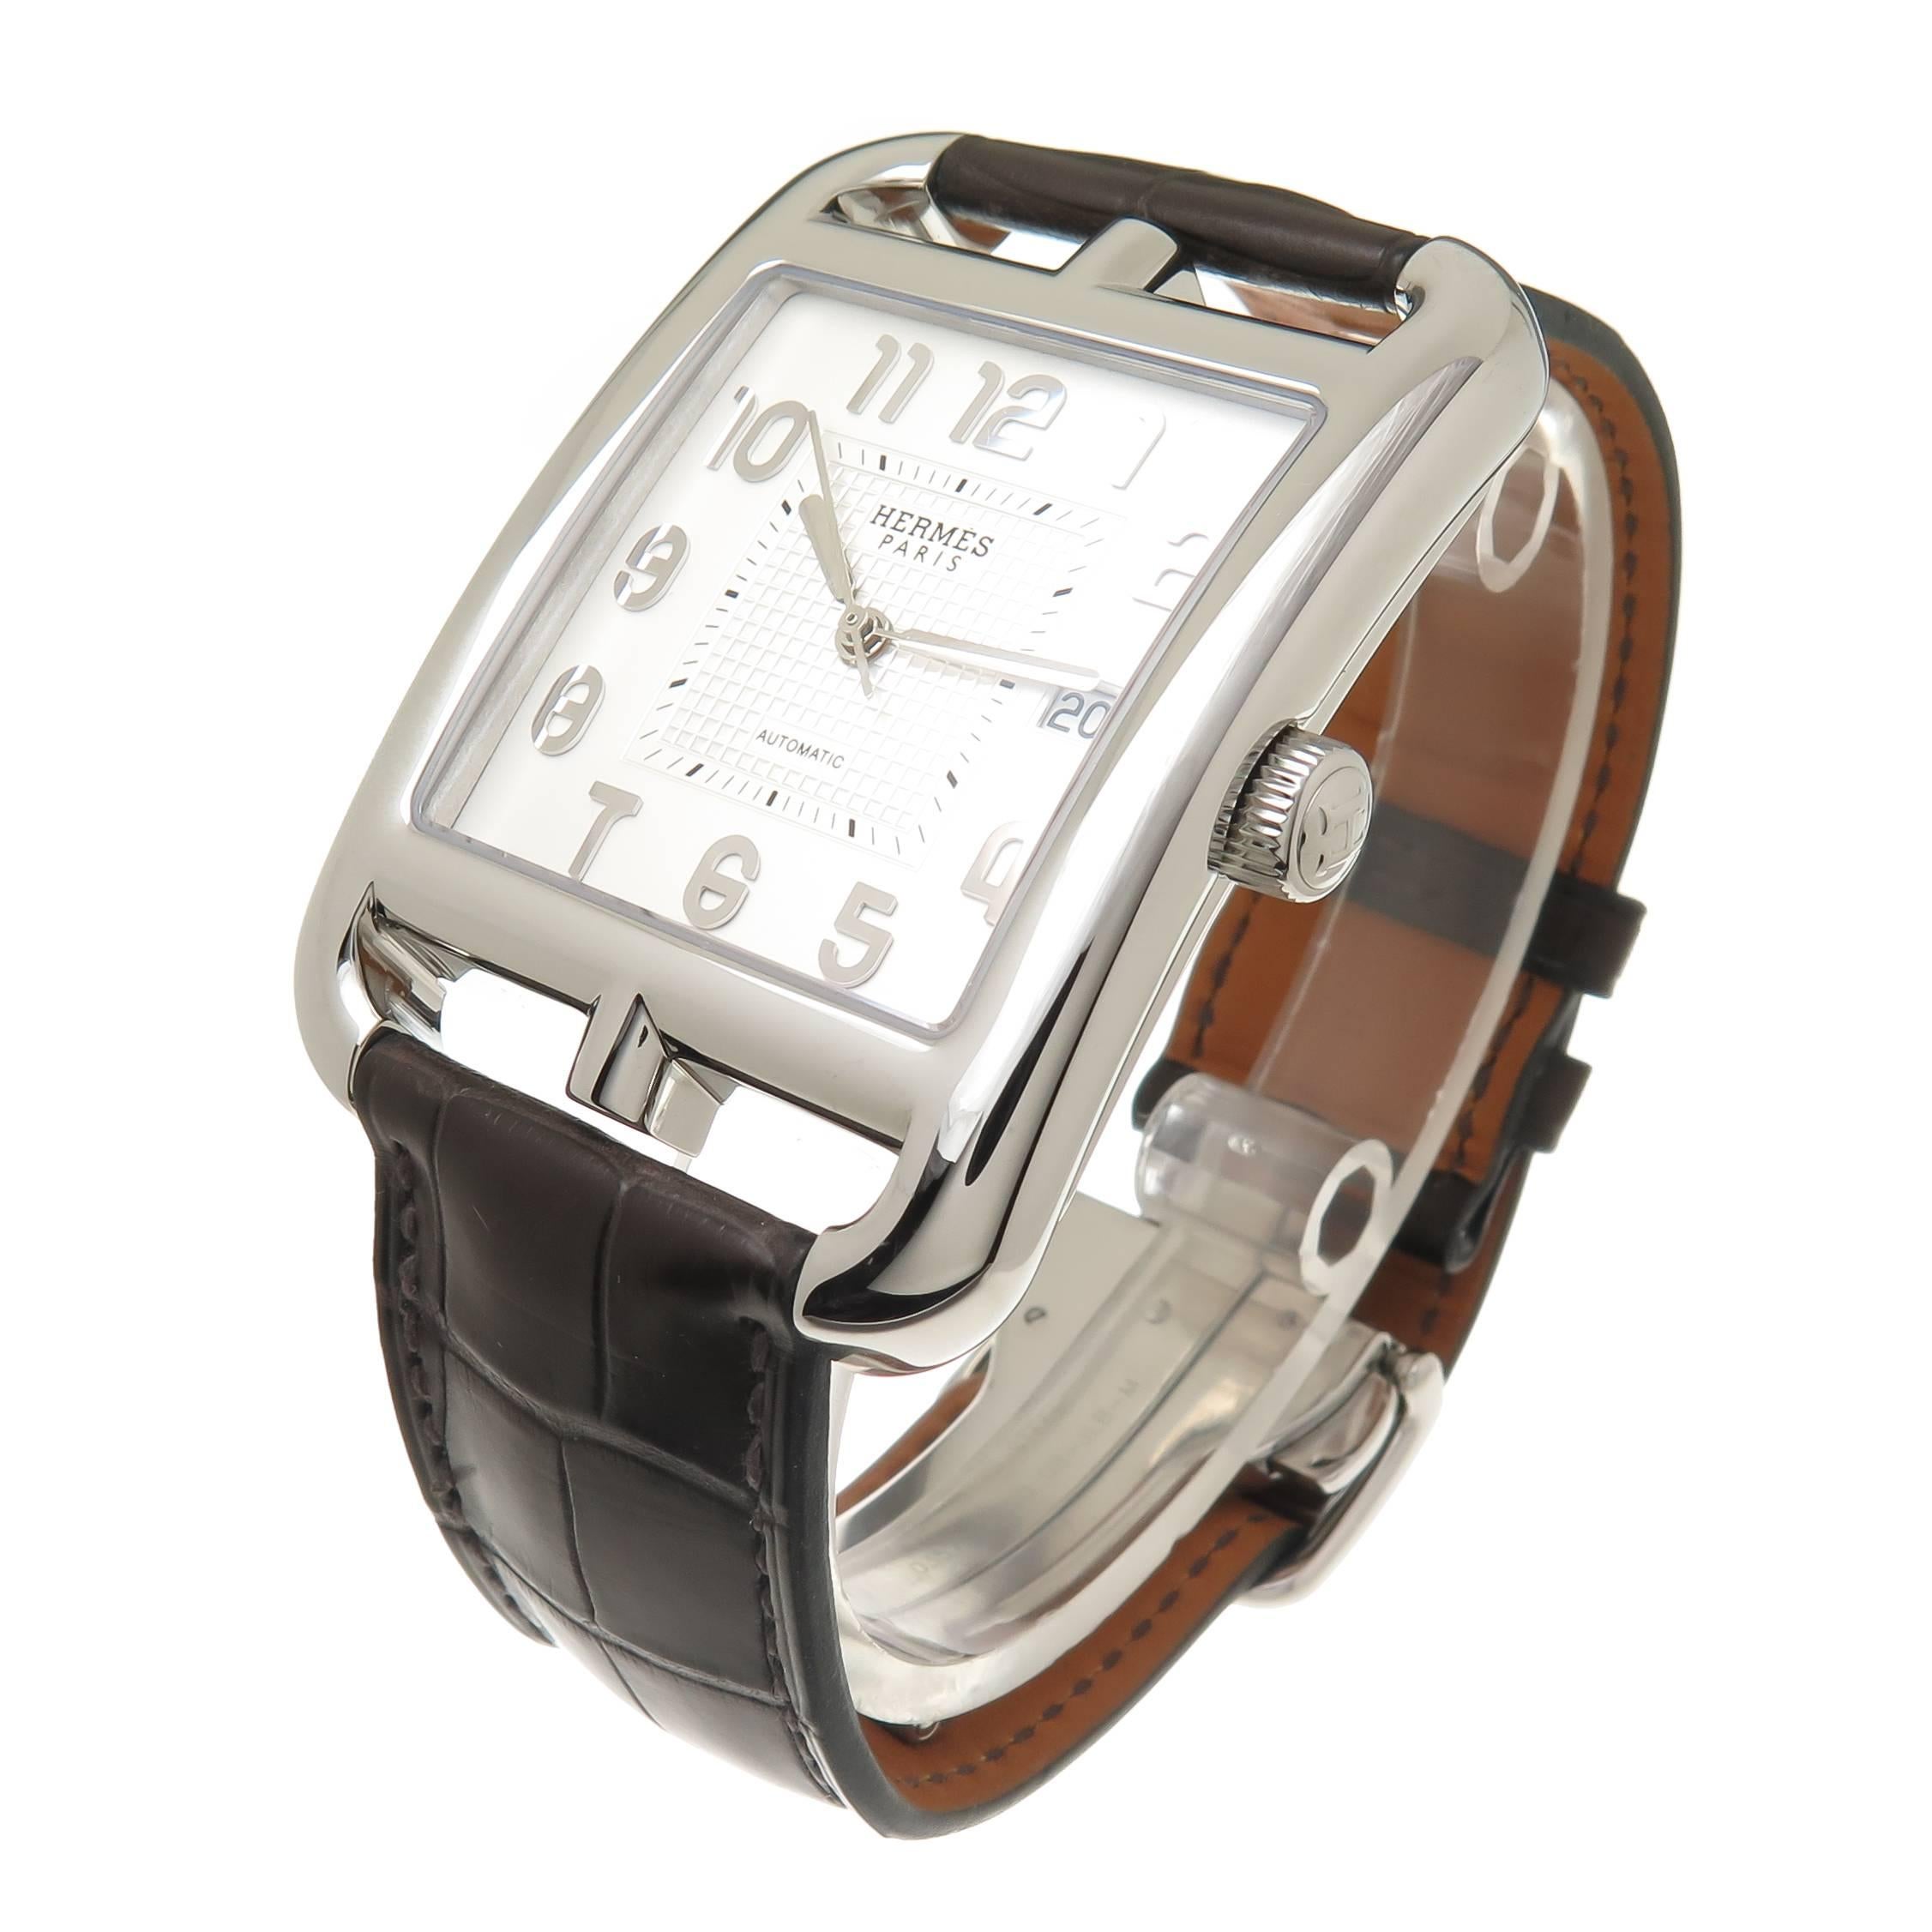 Circa 2014 Hermes Cape Cod Collection jumbo Size Wrist watch, 49 MM (lug end to end ) X 36 MM wide Stainless Steel case, Automatic, self winding movement, sweep seconds hand, Calendar window at the 3 and a White and silver dial with raised silver